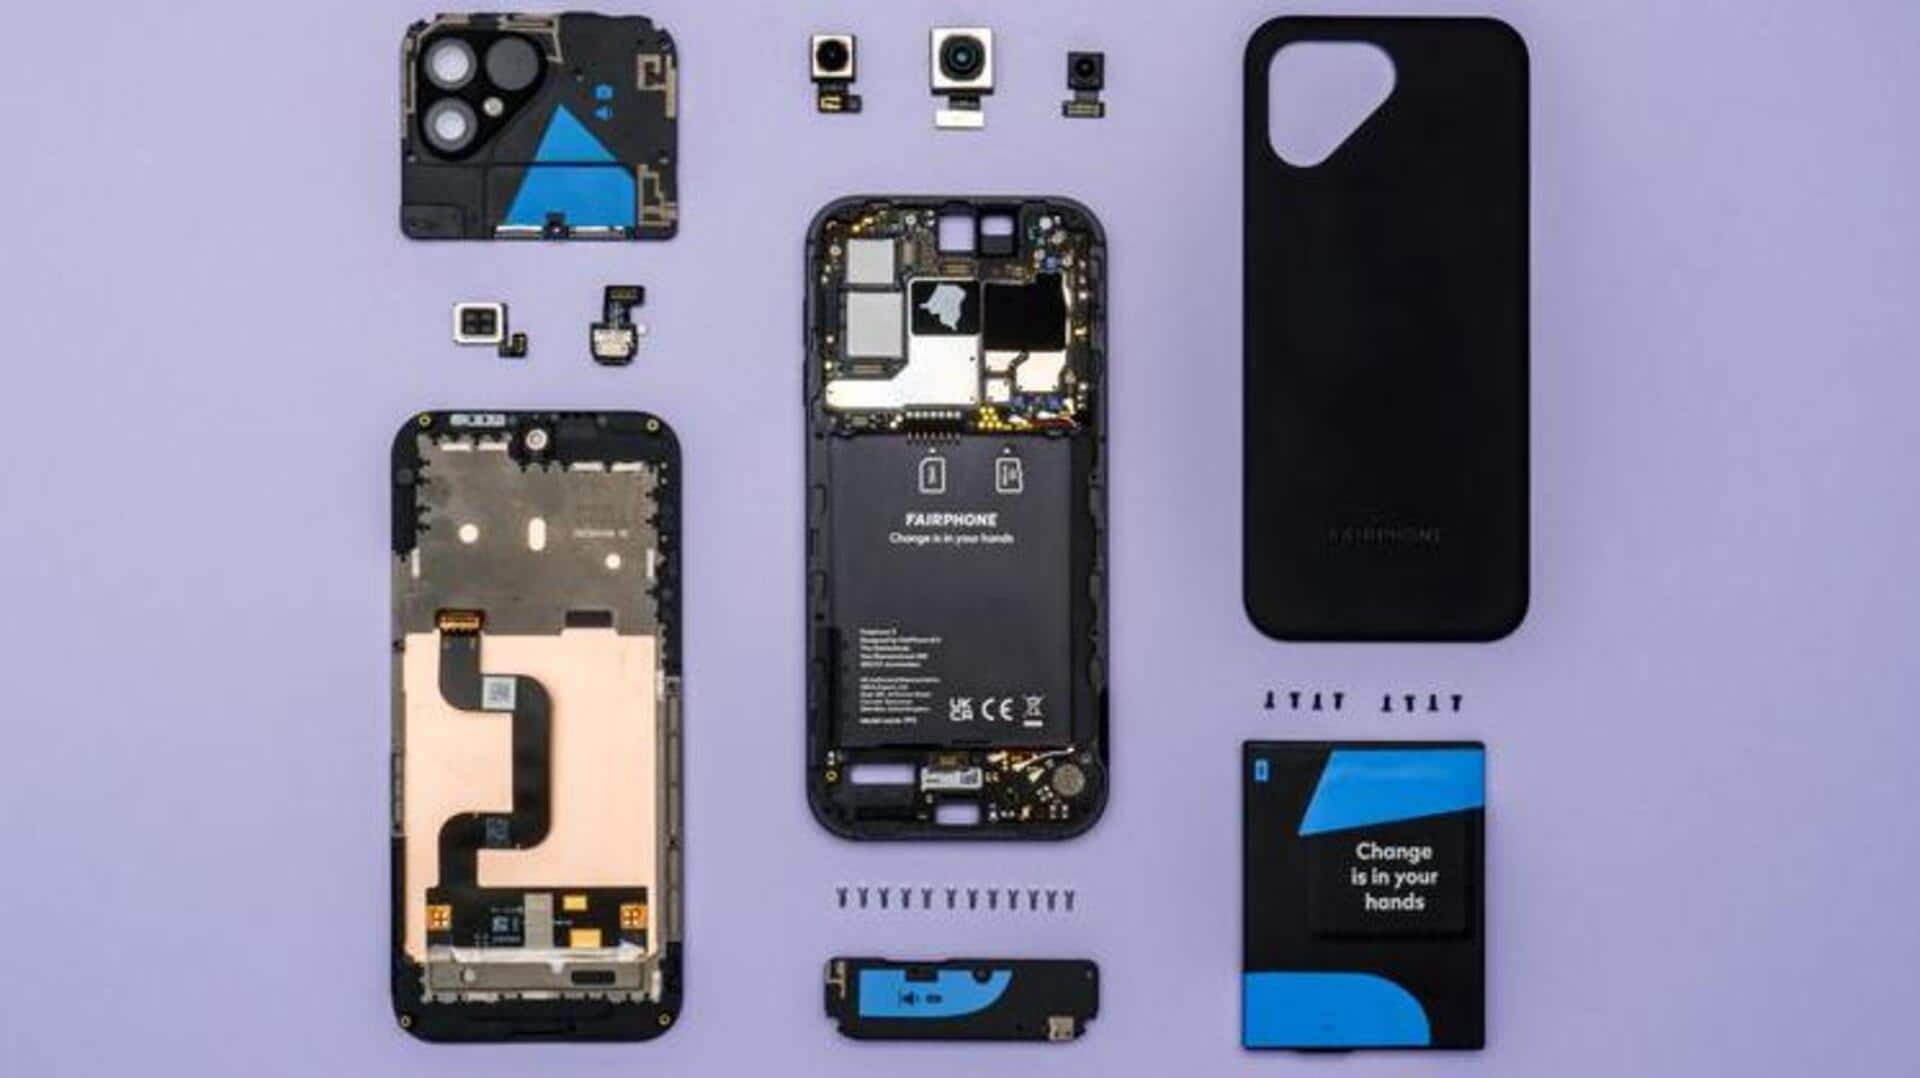 Fairphone 5 arrives to spur sustainable smartphone innovation: Check features